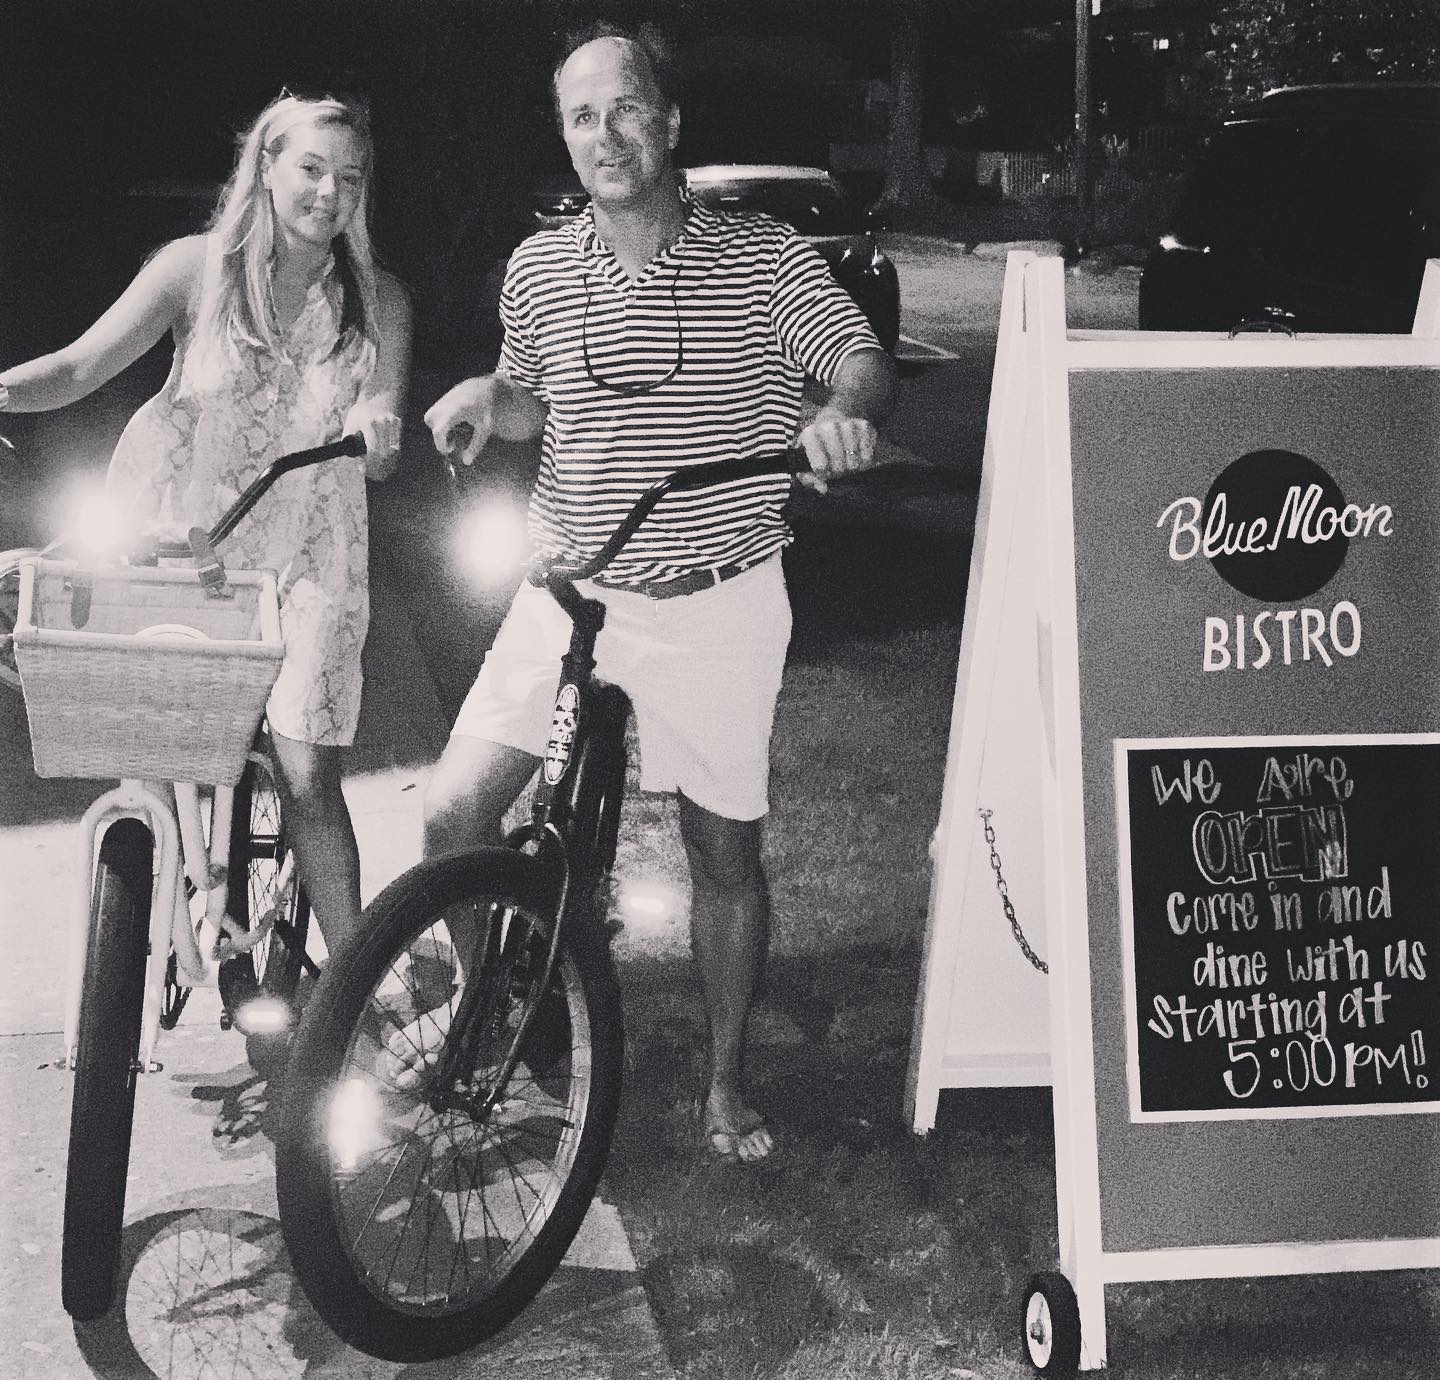 Date night with my fave @wshiiidds at our fave @bluemoonbstro. 🌙 🌝 The bikes just make it better. Can’t say why 🚲 🤷🏼‍♀️ 

Beaufort is great all year long but summer is a sweet and special magic. ⭐️🥂

#BlueMoonBistro #BeaufortNC